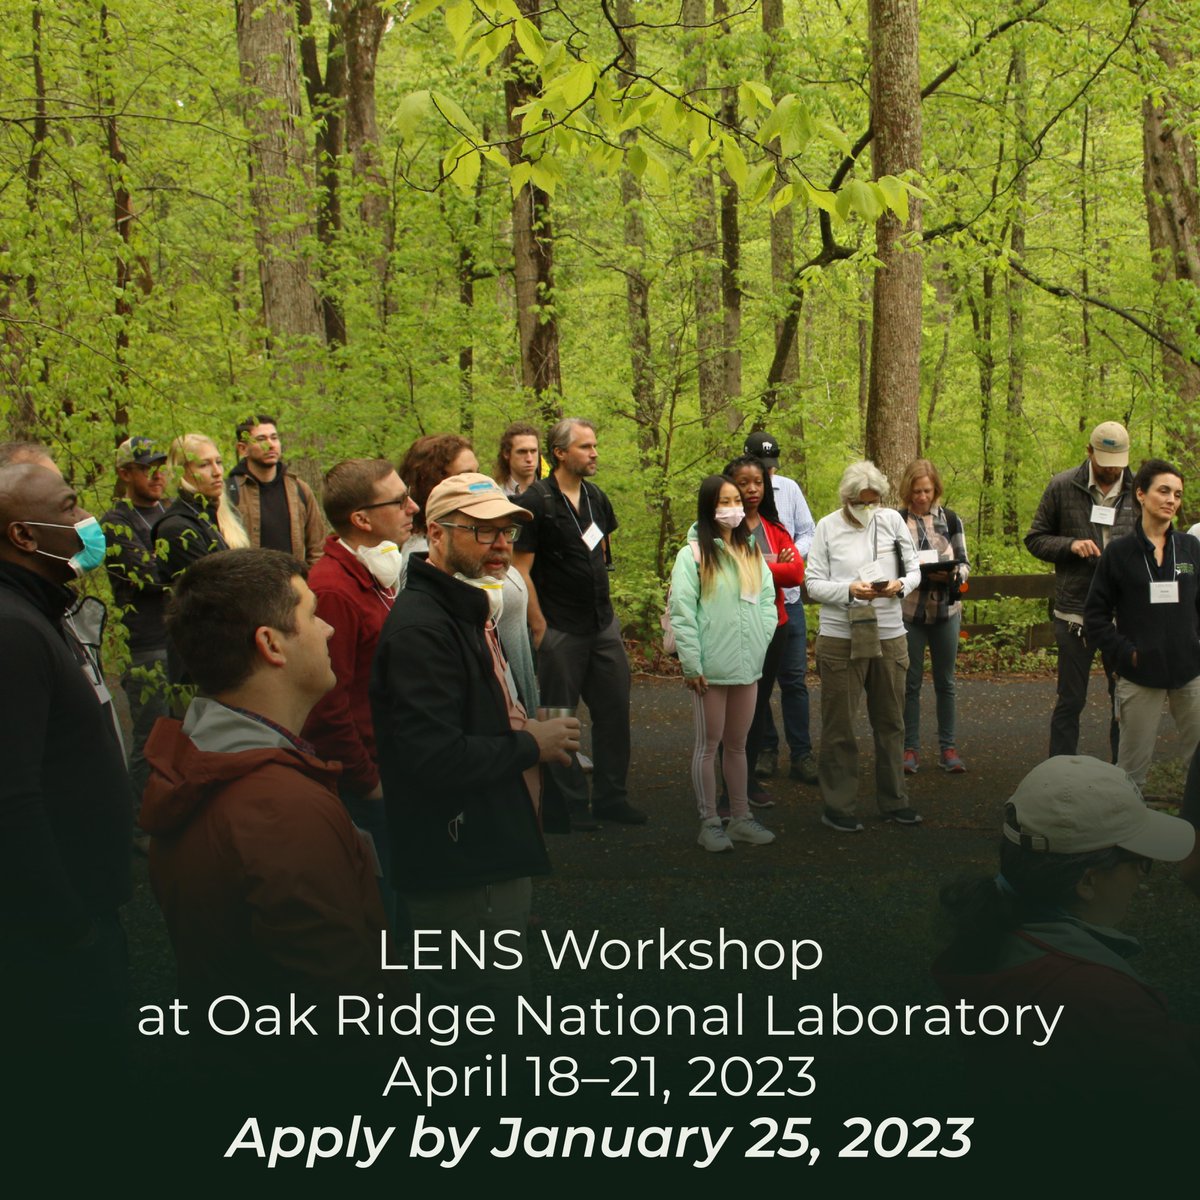 We're hosting a workshop in April! Come join us! To apply, see the full announcement here: lensrcnorg.wordpress.com/2023/01/05/app… #NEON #remotesensing #workshop #datascience #LiDAR #forestry